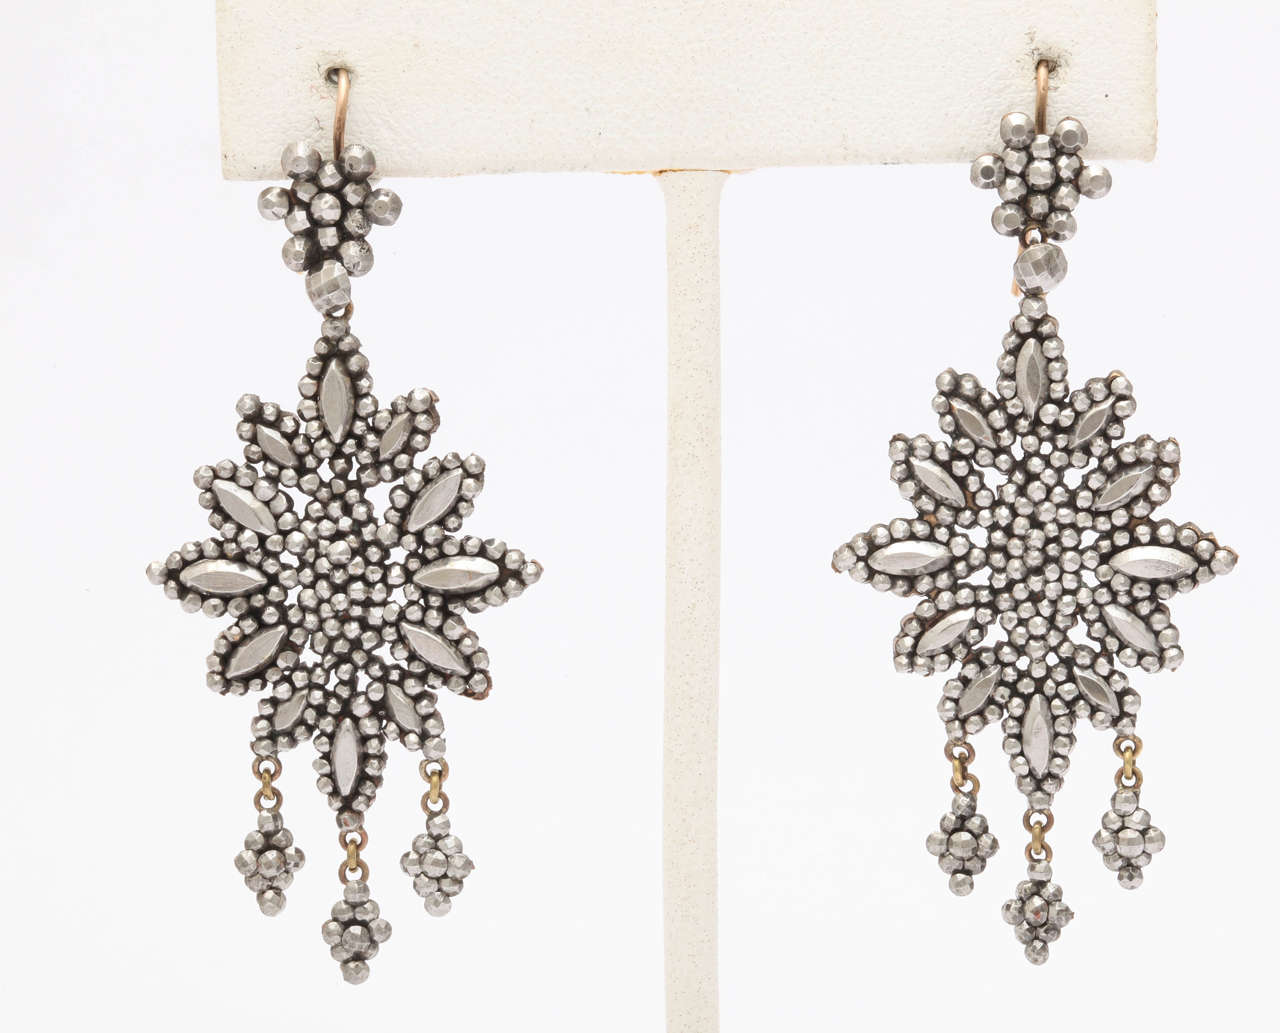 A lush example of Georgian chandelier earning, is intricate and artfully made of the tiniest bits of hand cut, diamond like cut steel c.1830. The earrings are semi abstract flowers with three girandole drops. All arts other than the oval petals are